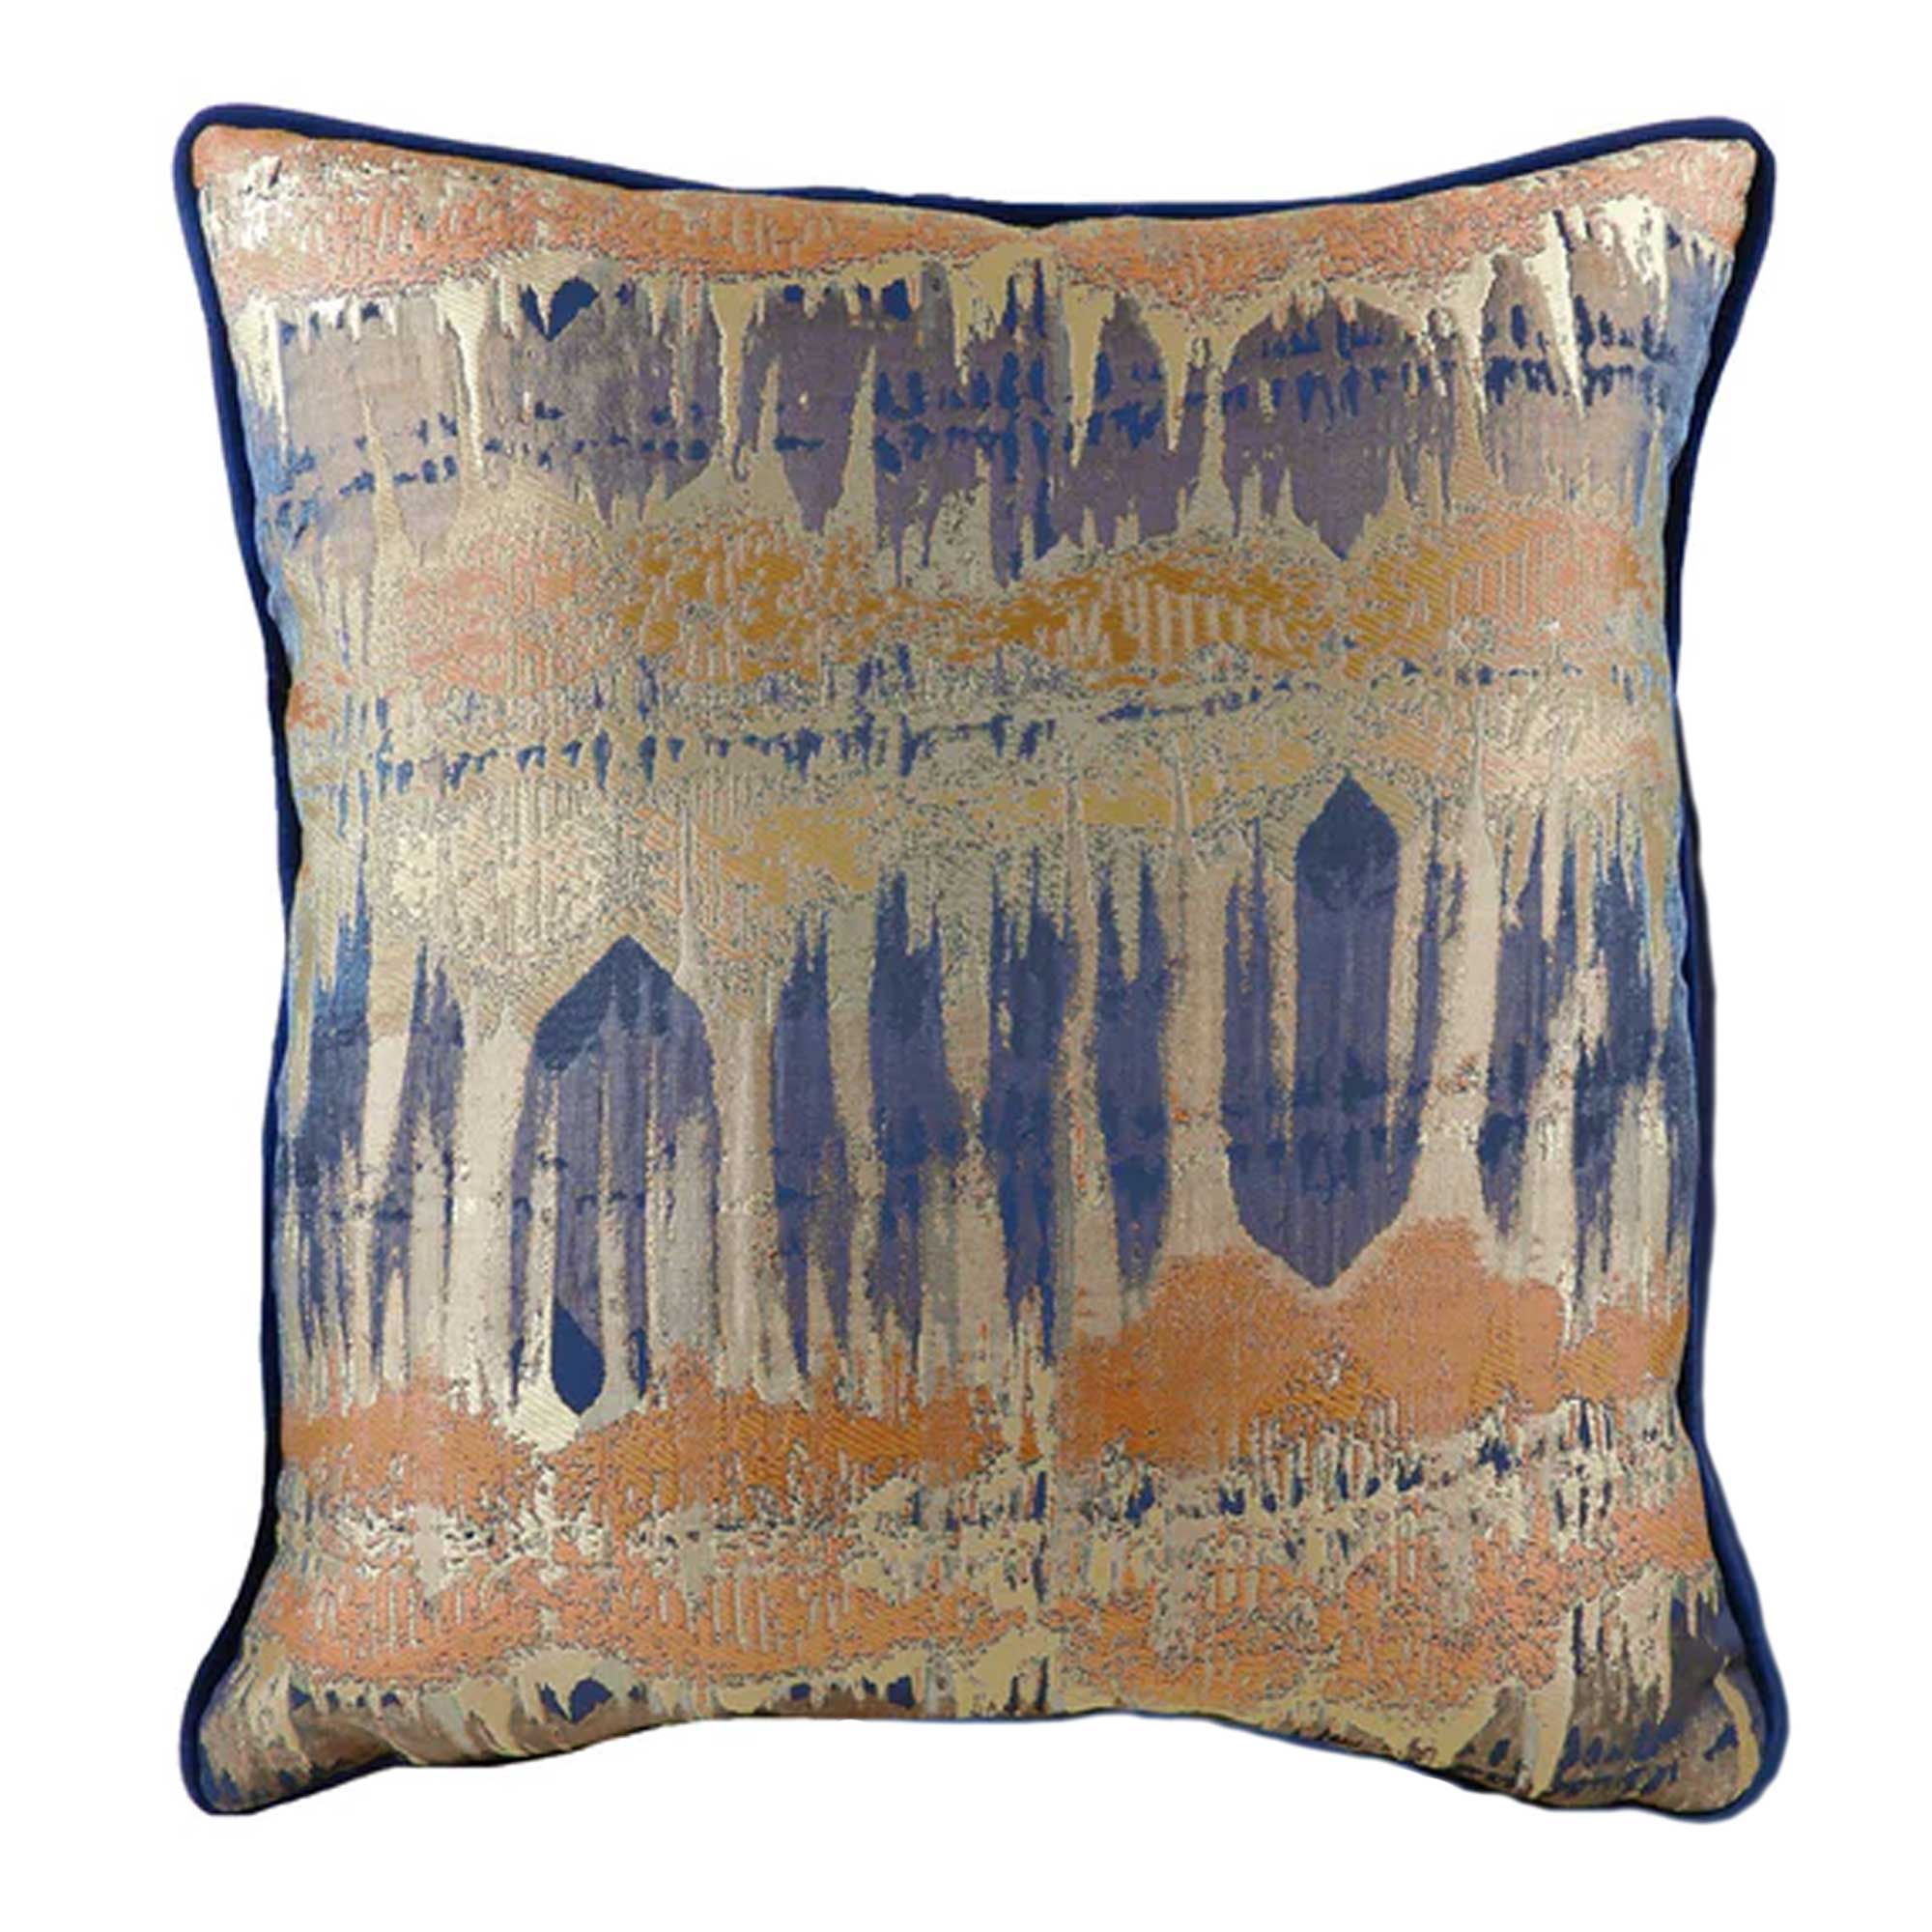 Marbled Blue Cushion, Square | Barker & Stonehouse